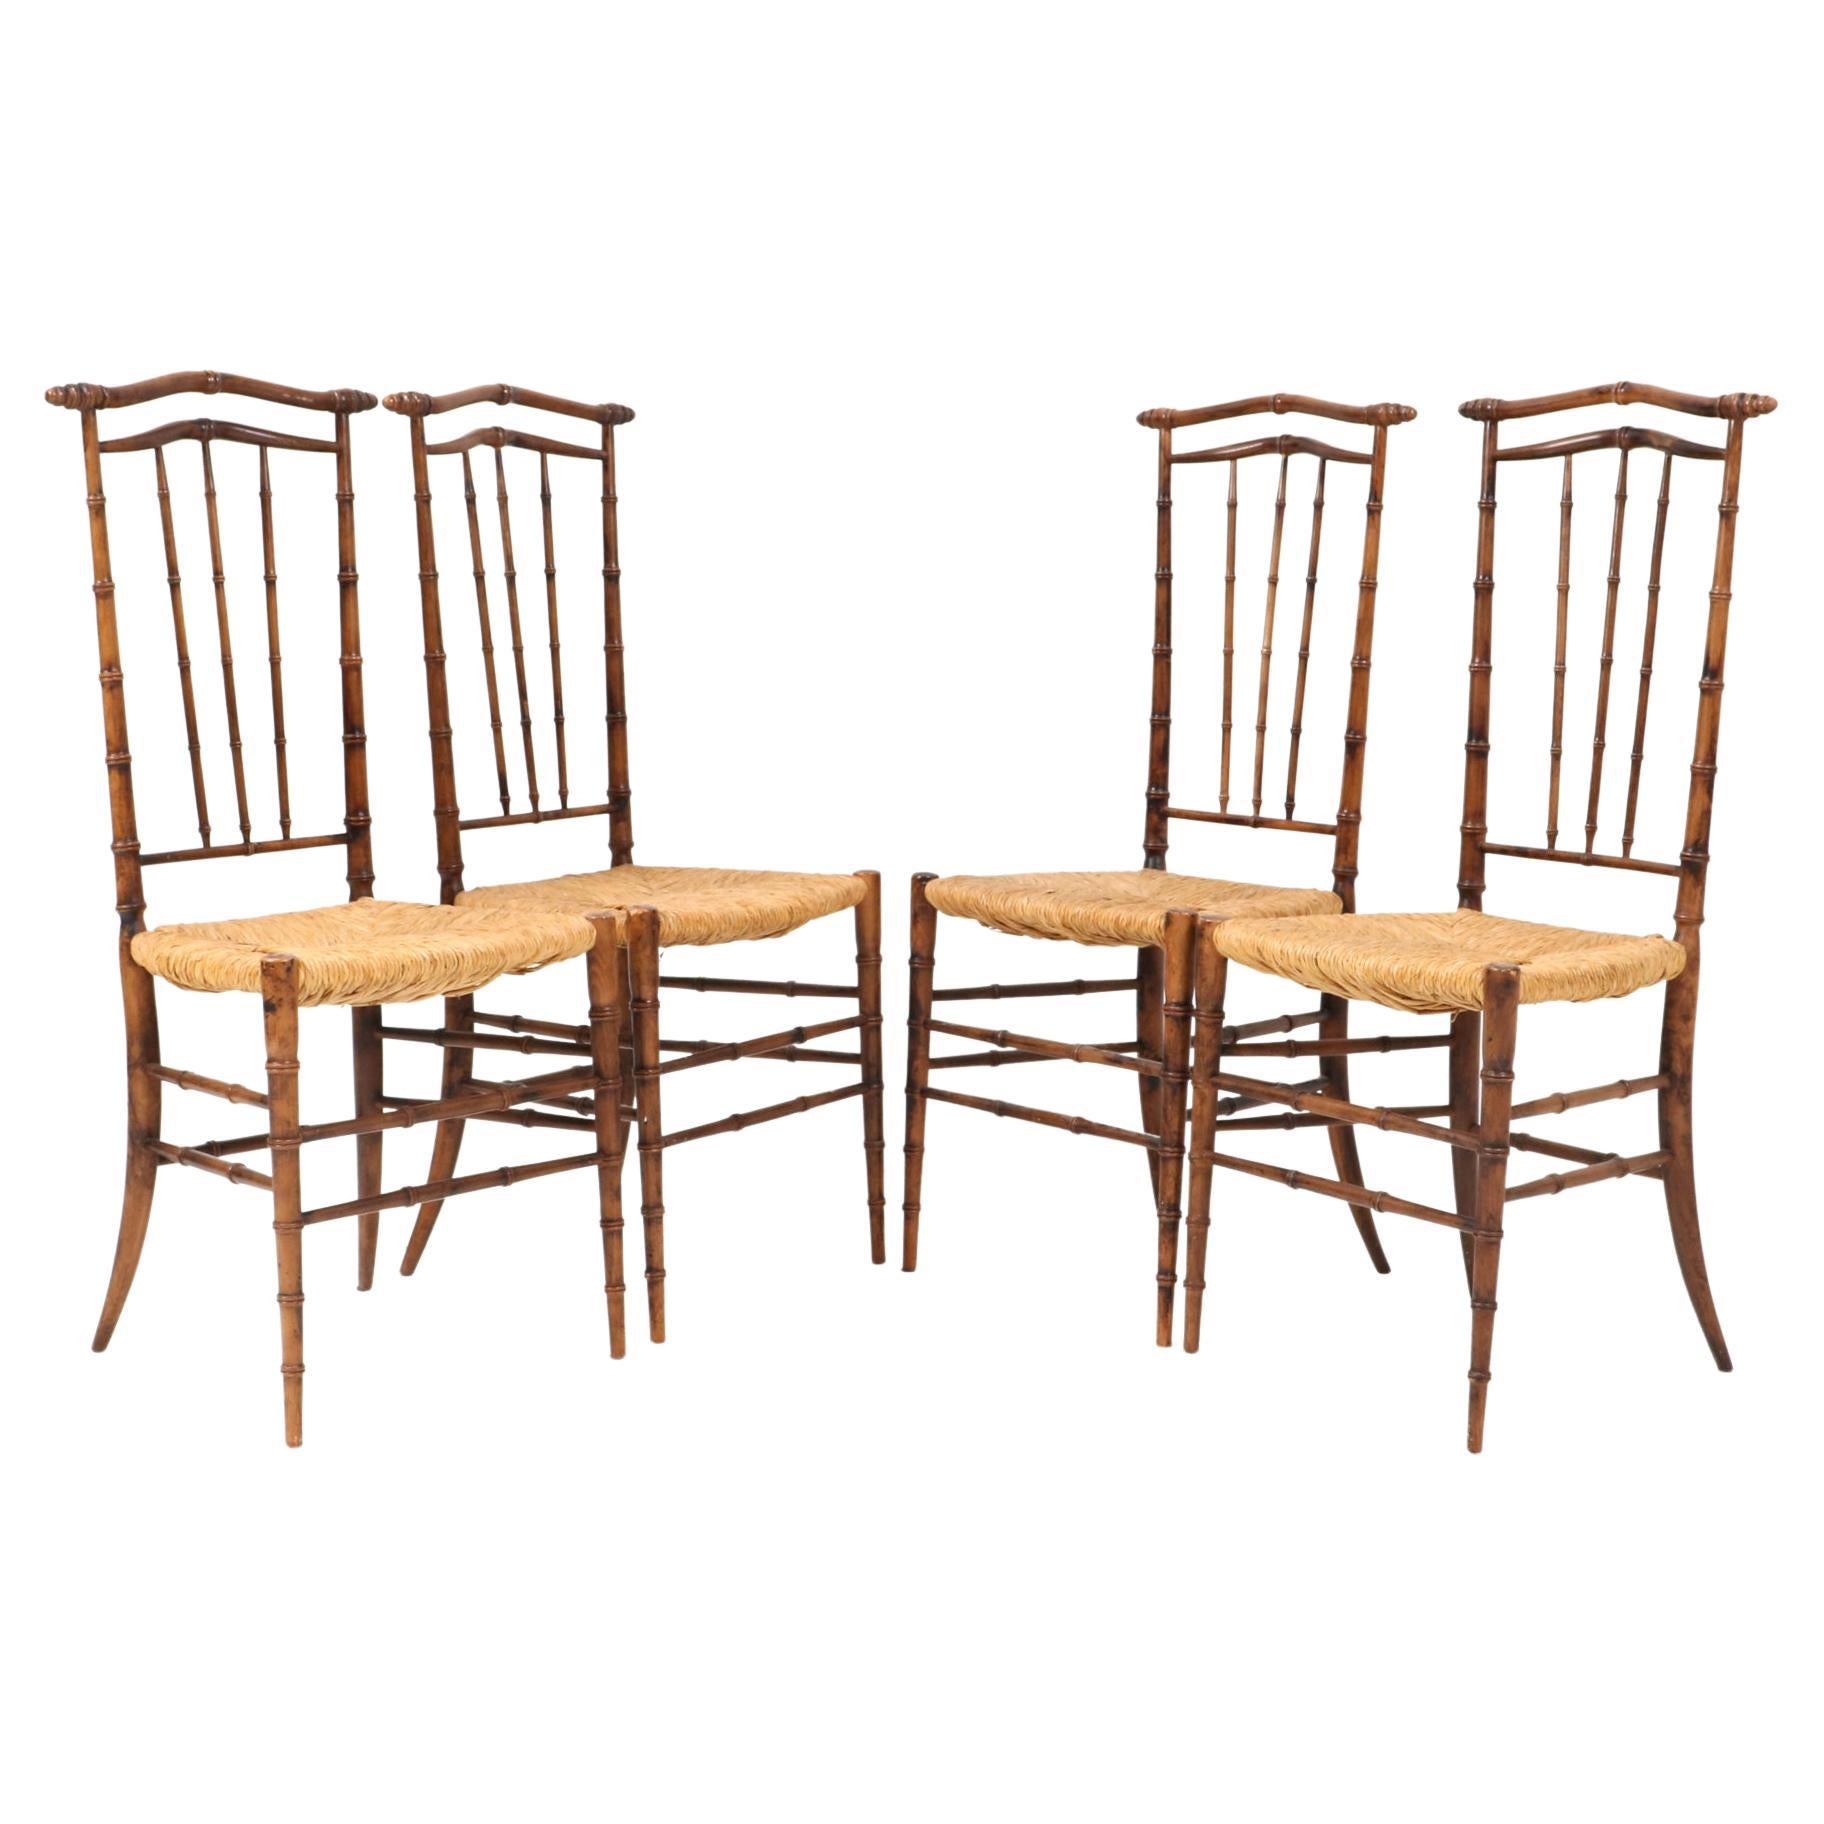 Four Beech Mid-Century Modern Faux Bamboo High Back Dining Room Chairs, 1970s